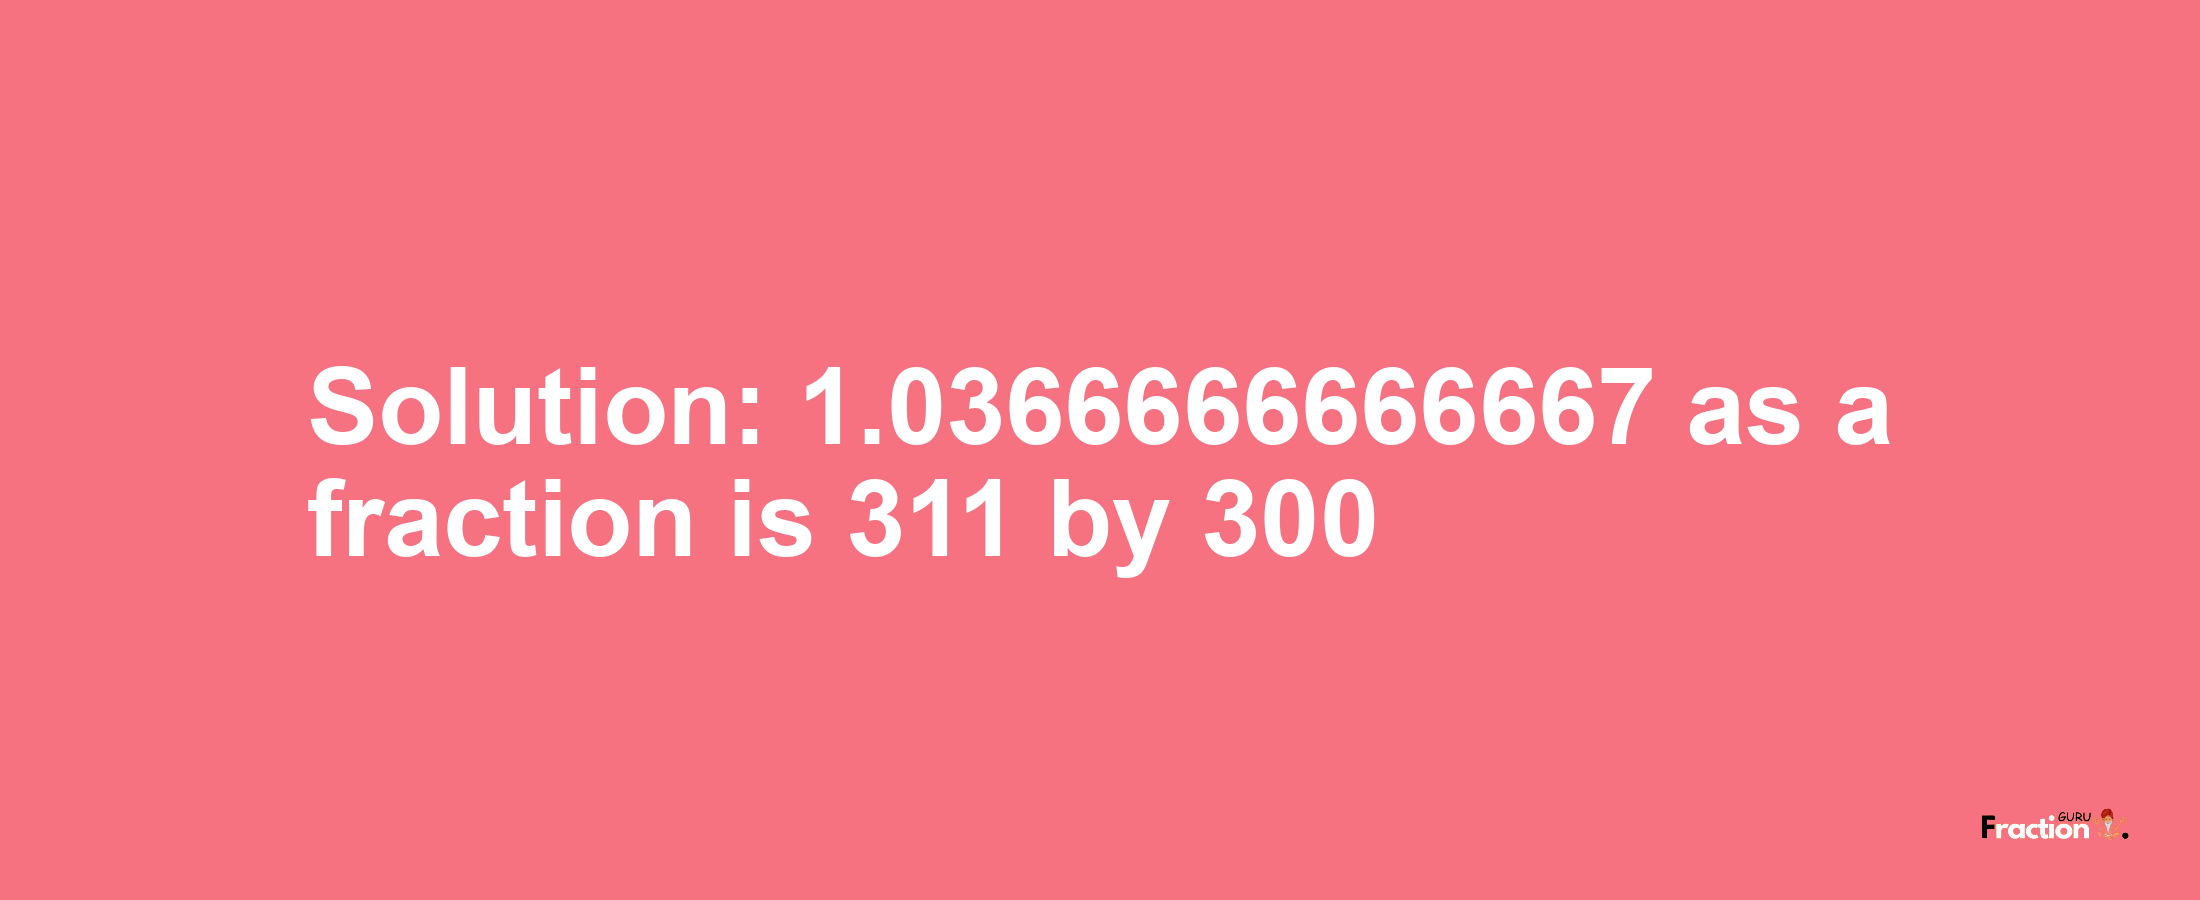 Solution:1.0366666666667 as a fraction is 311/300